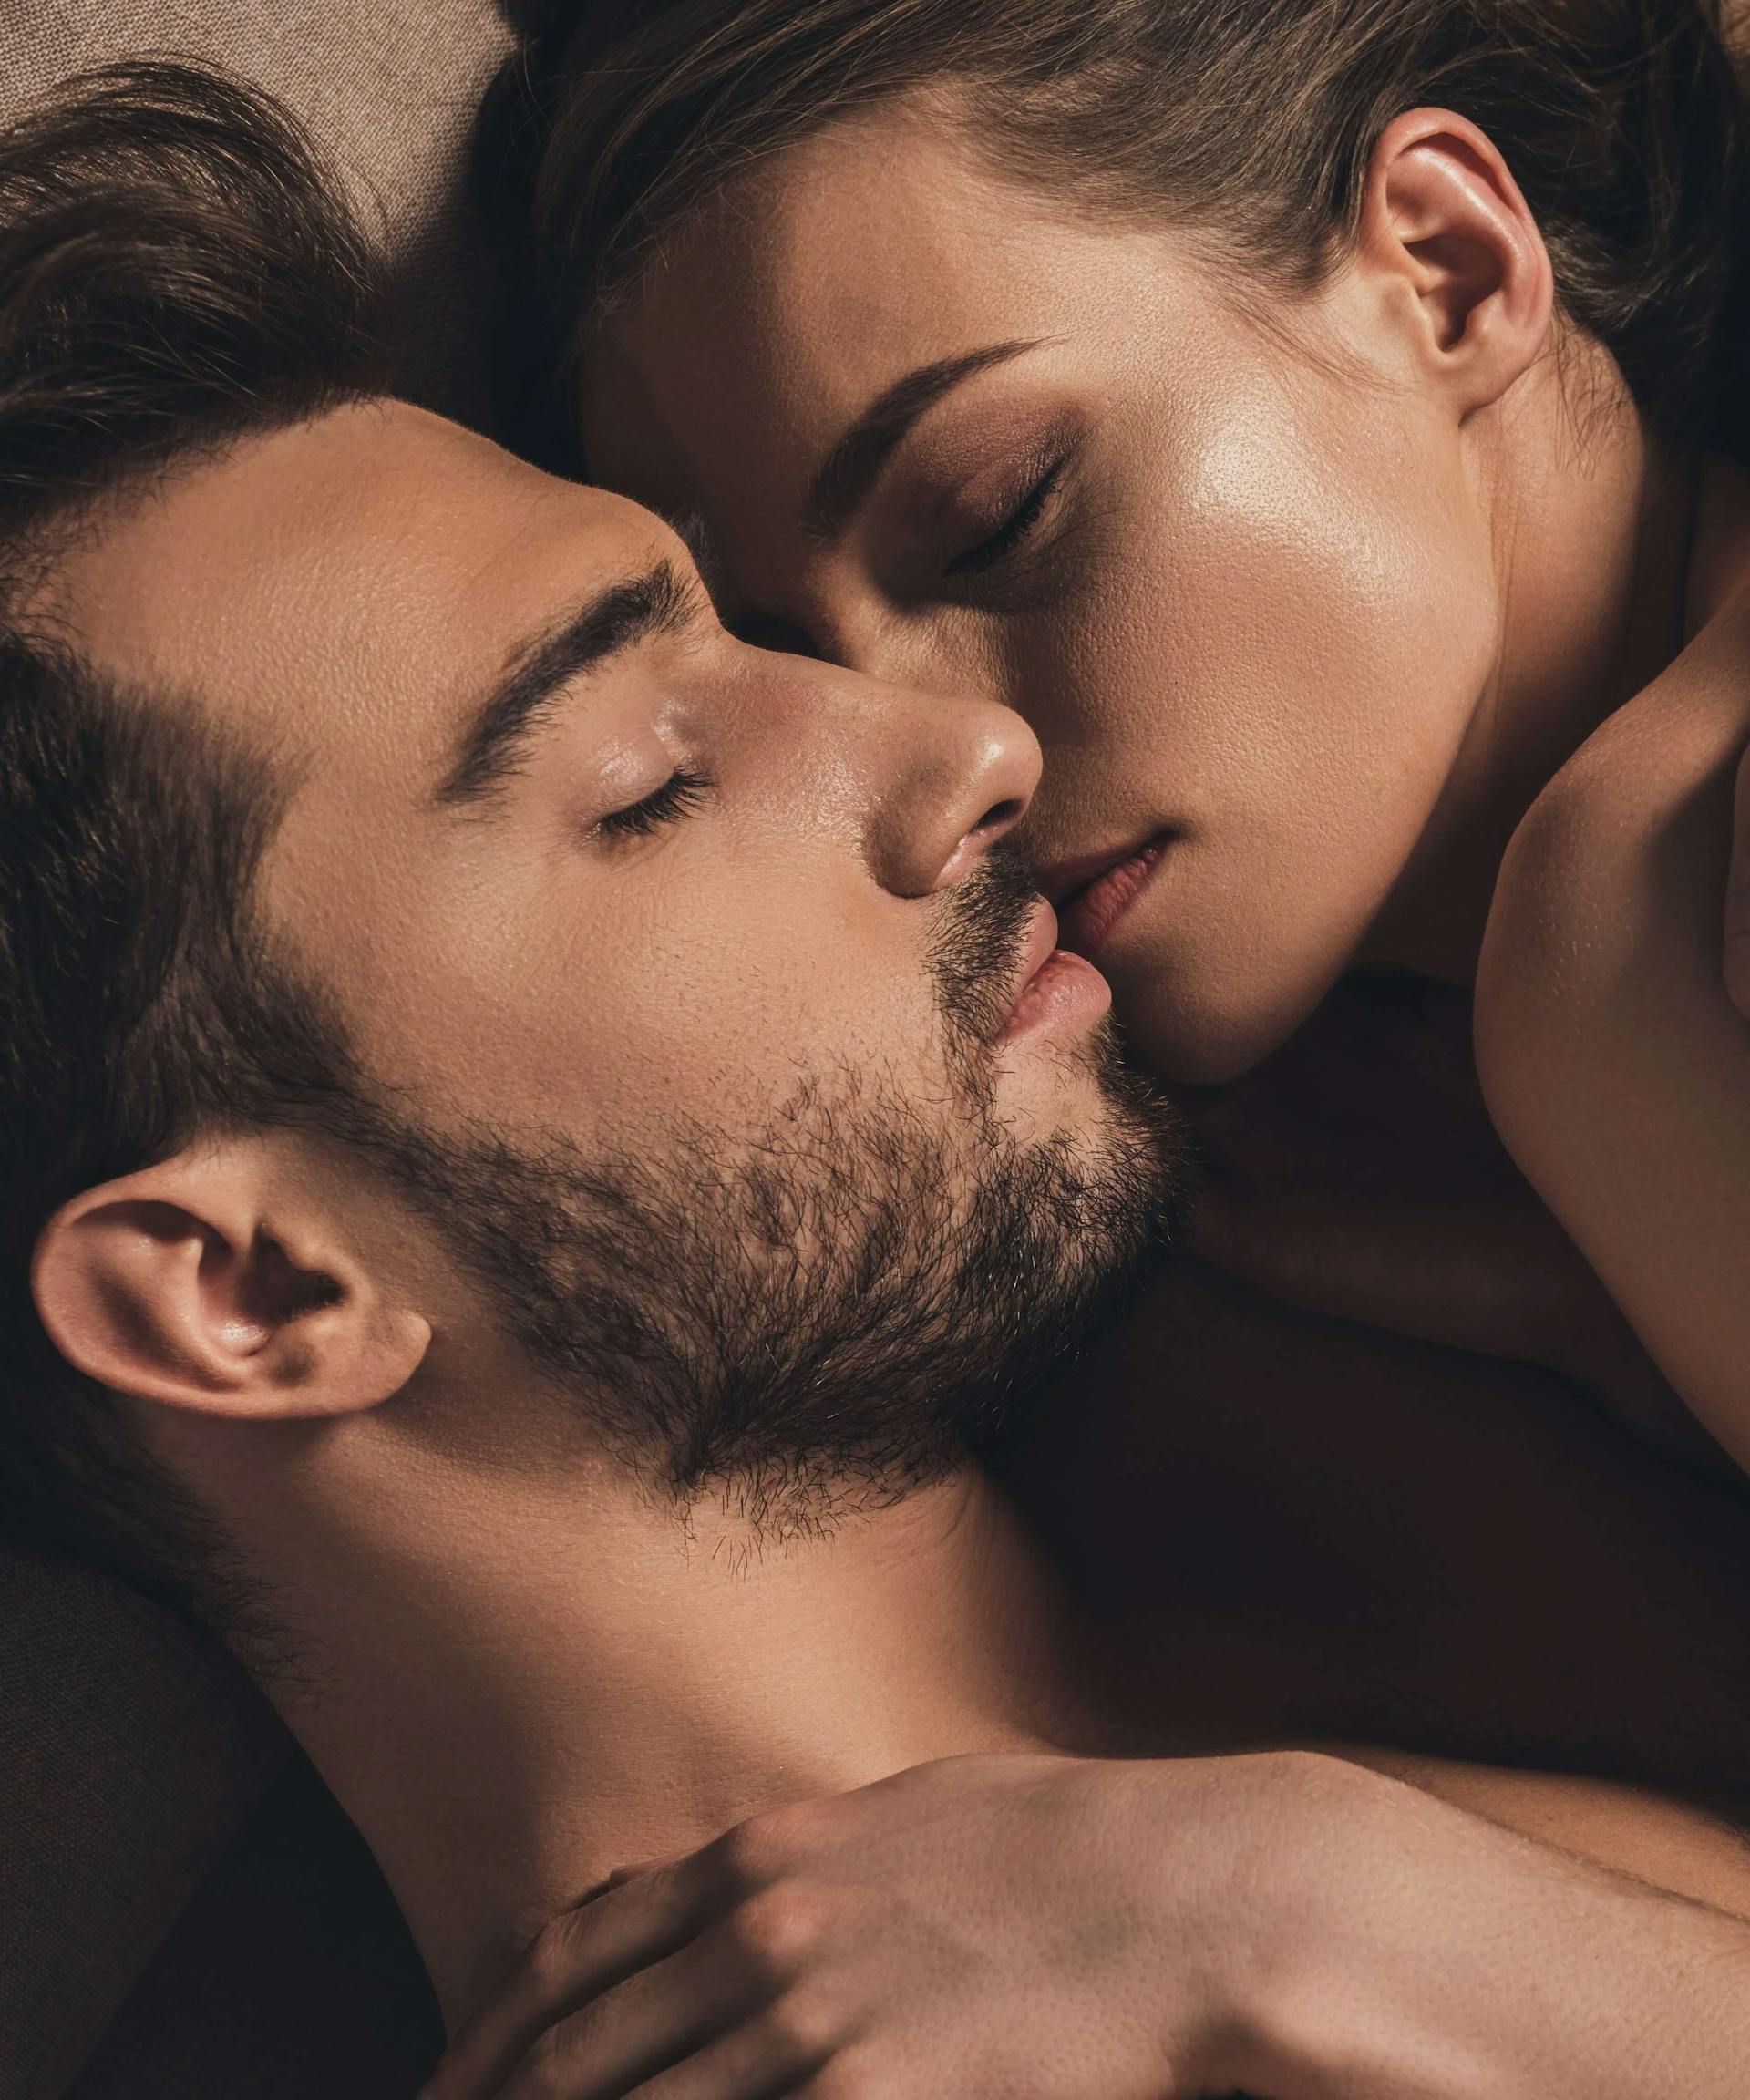 7 Ways To Spark A Romantic Night With Your Husband That Leads To The Bedroom